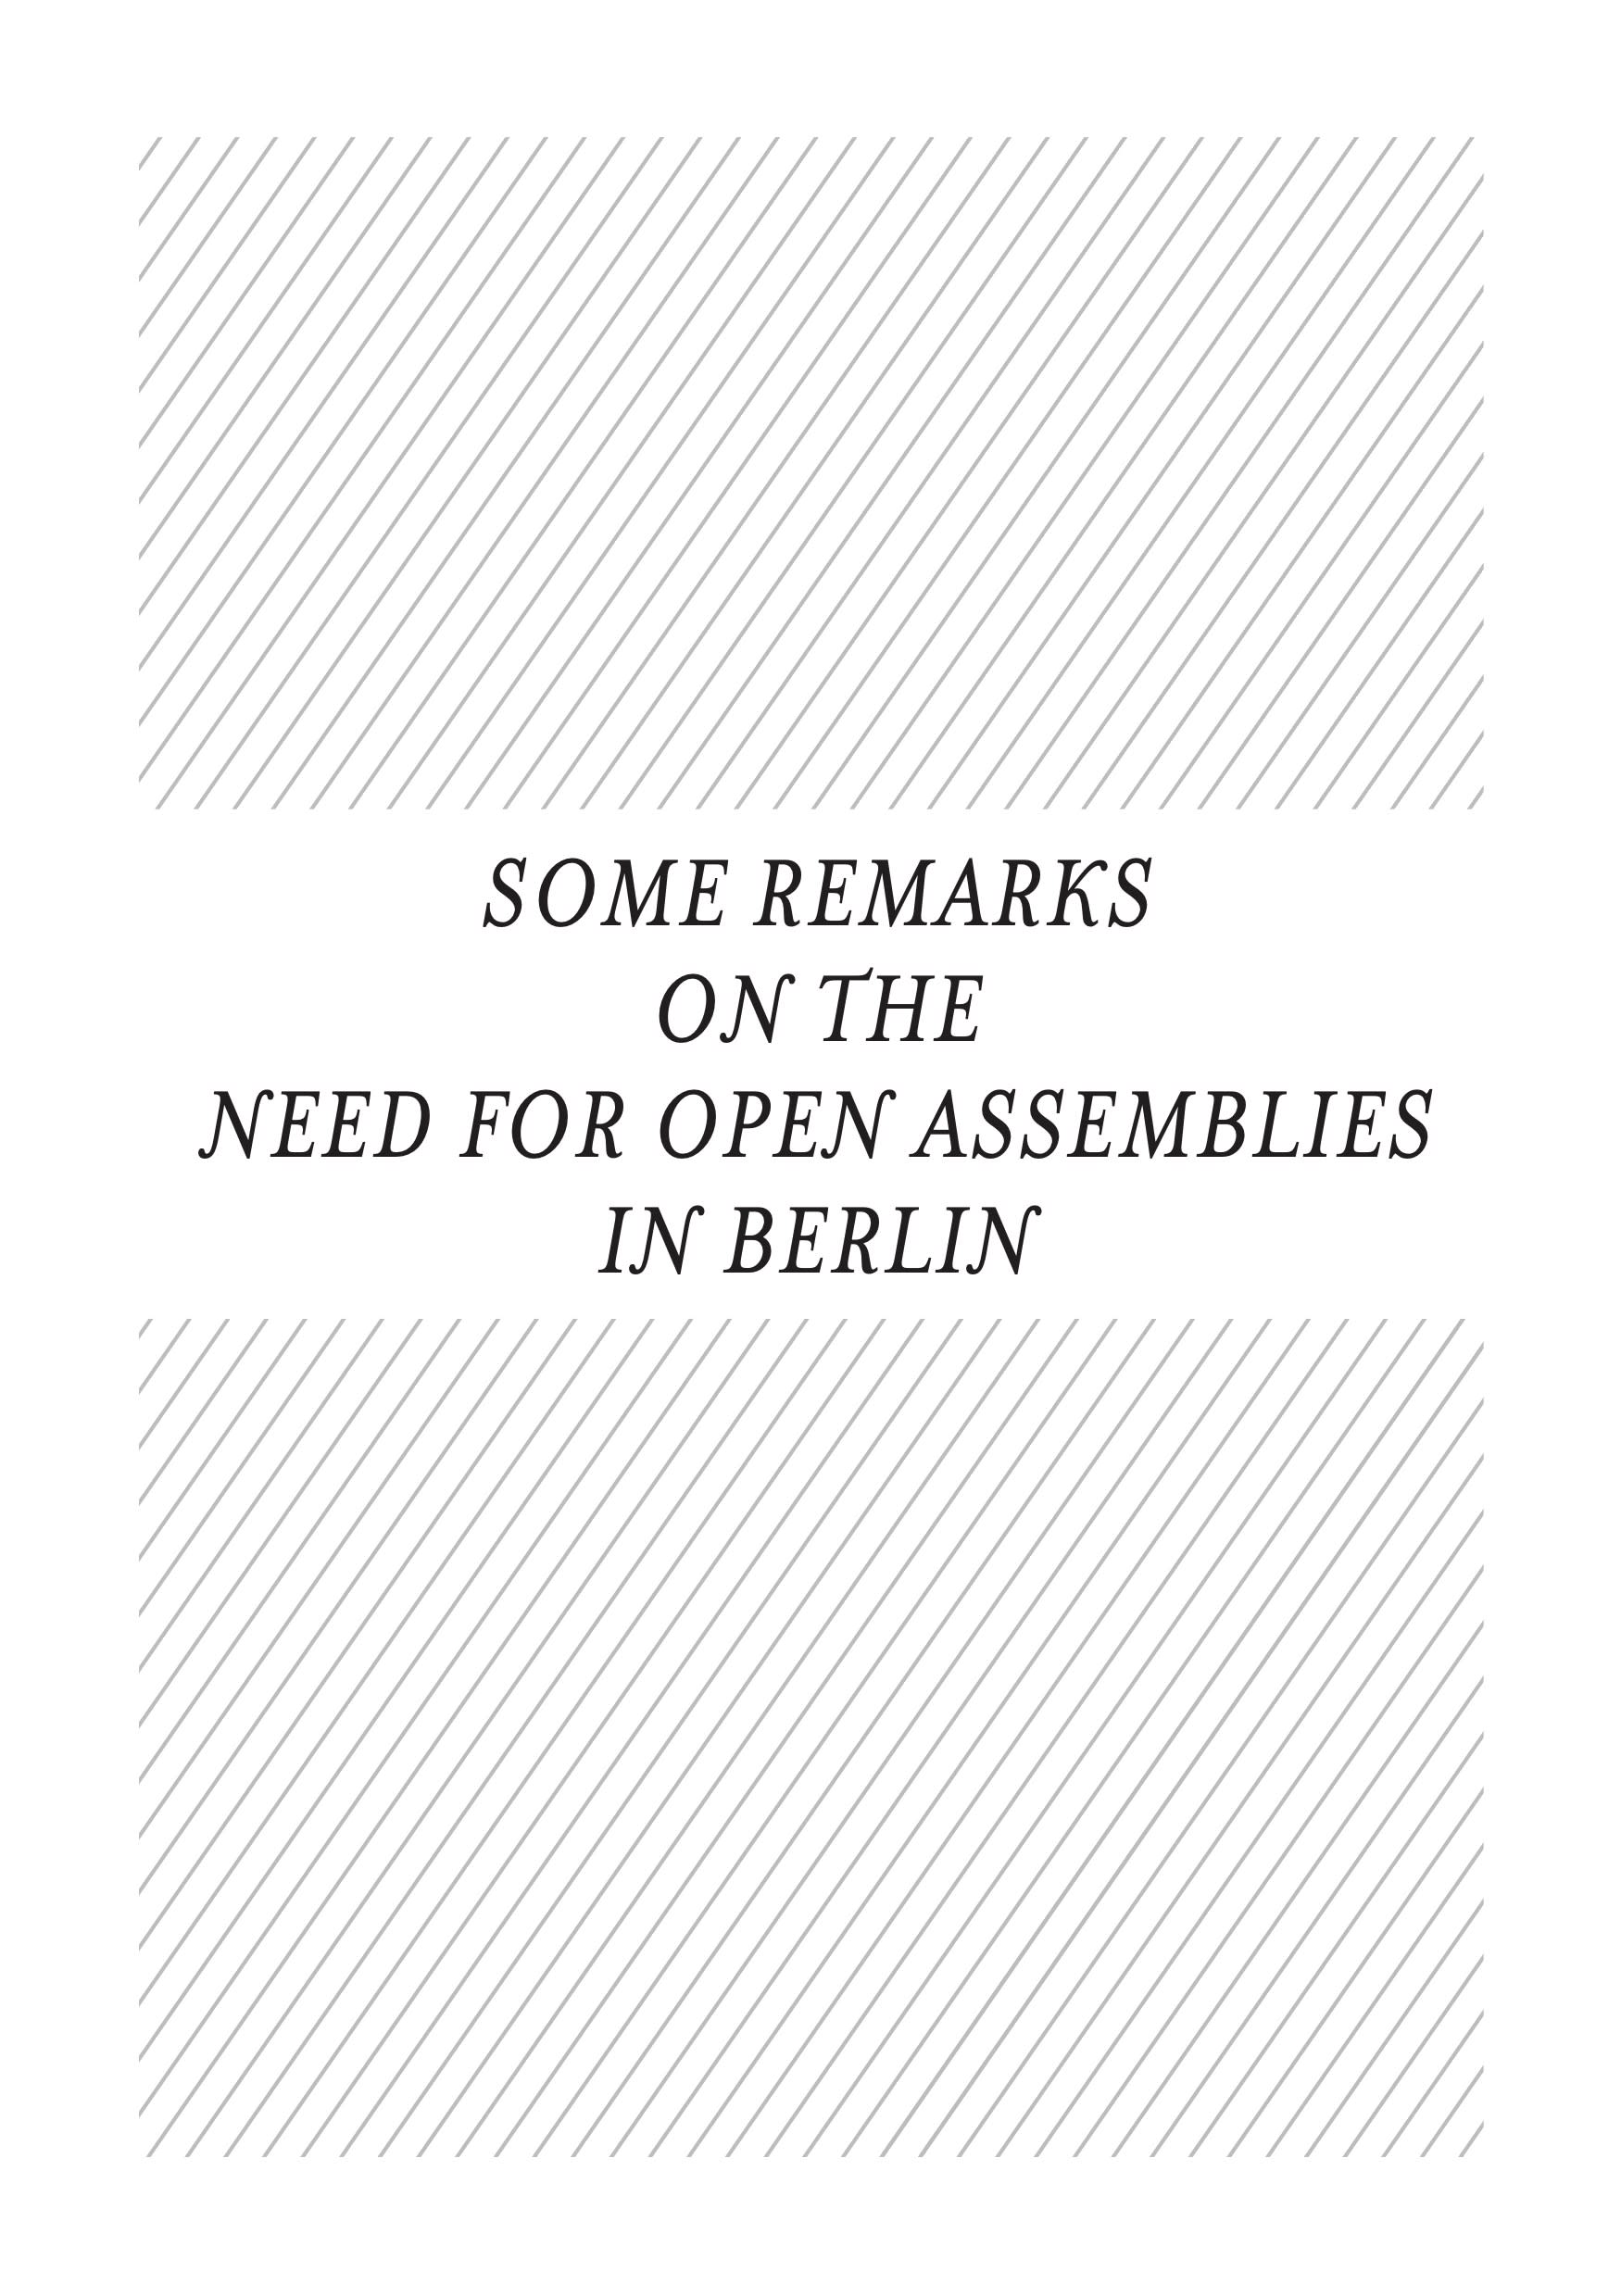 Cover Image for Some Remarks on the Need for Open Assemblies in Berlin